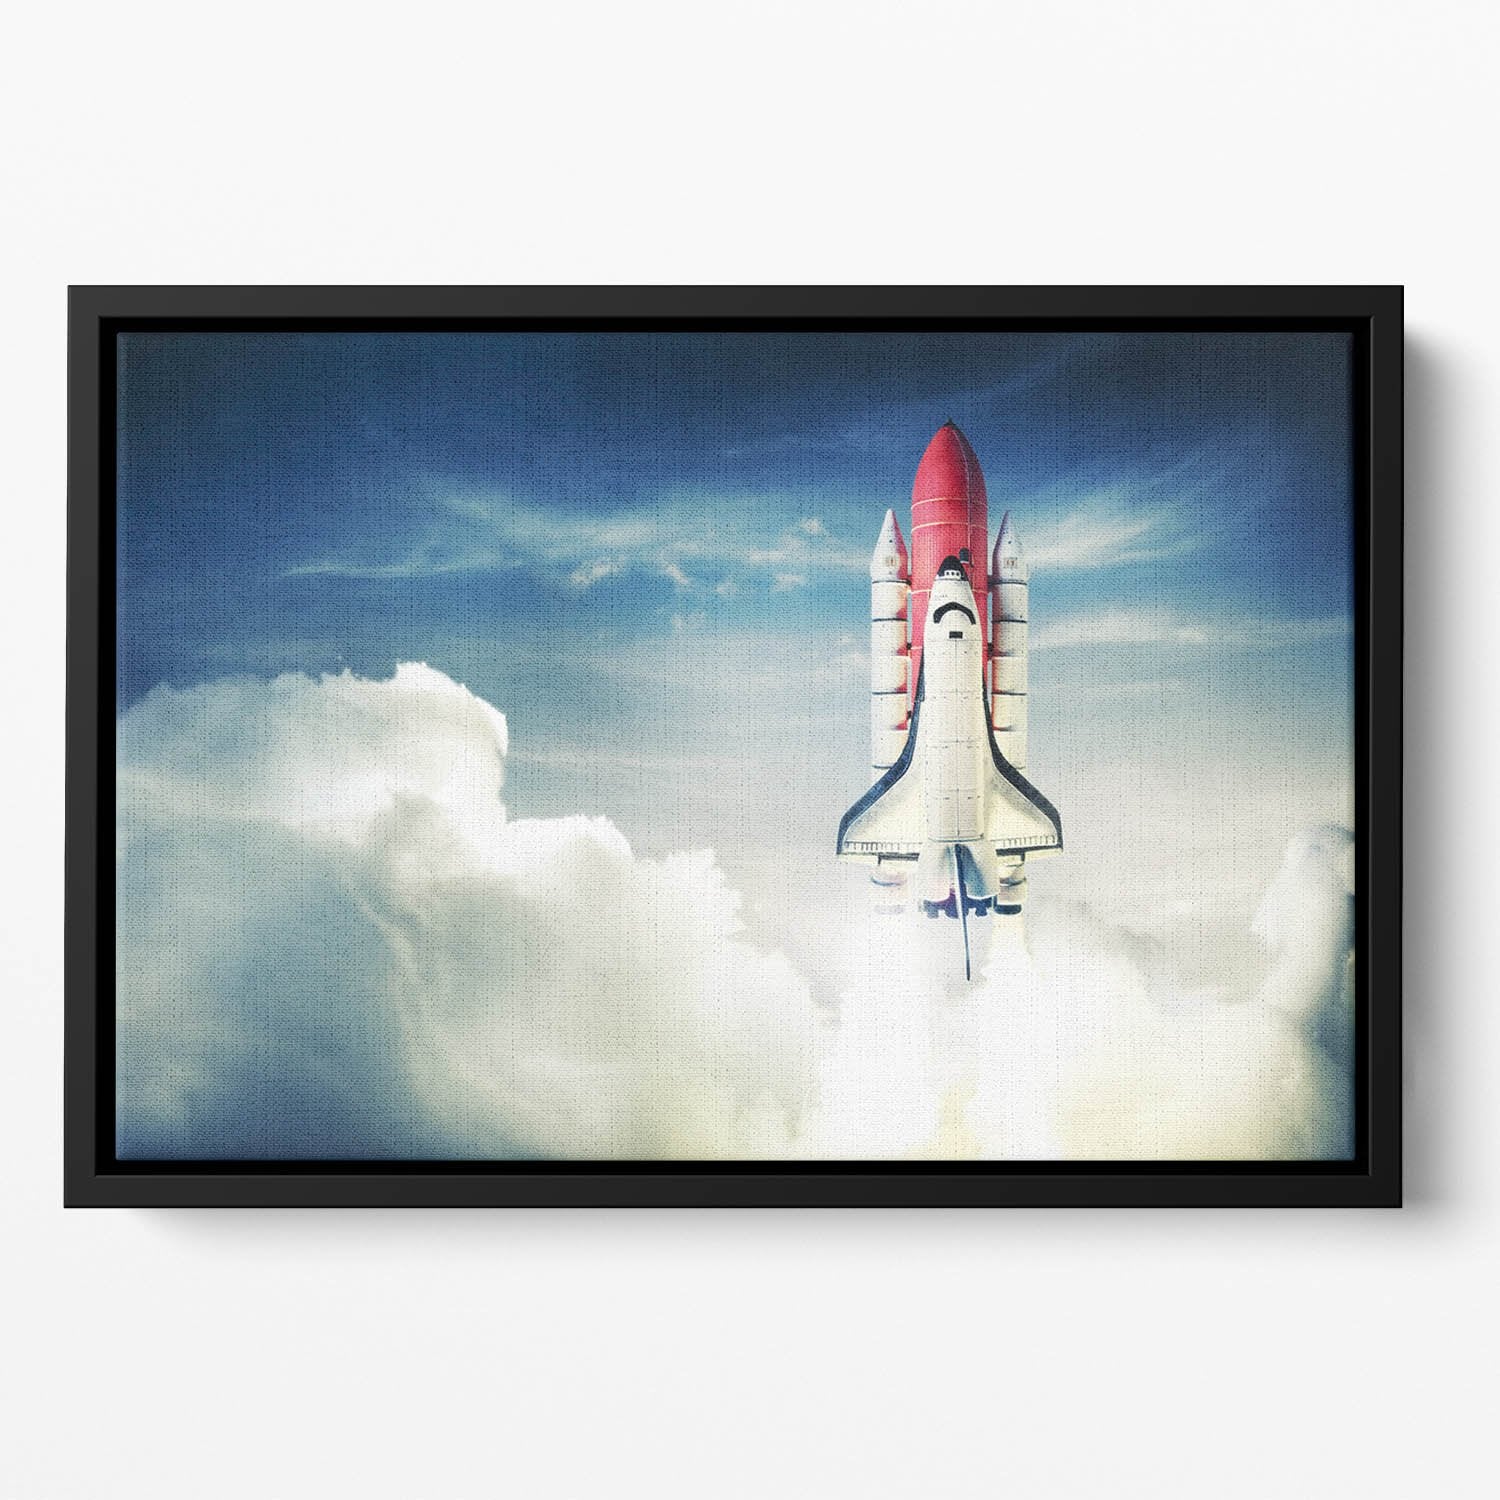 Space shuttle taking off on a mission Floating Framed Canvas